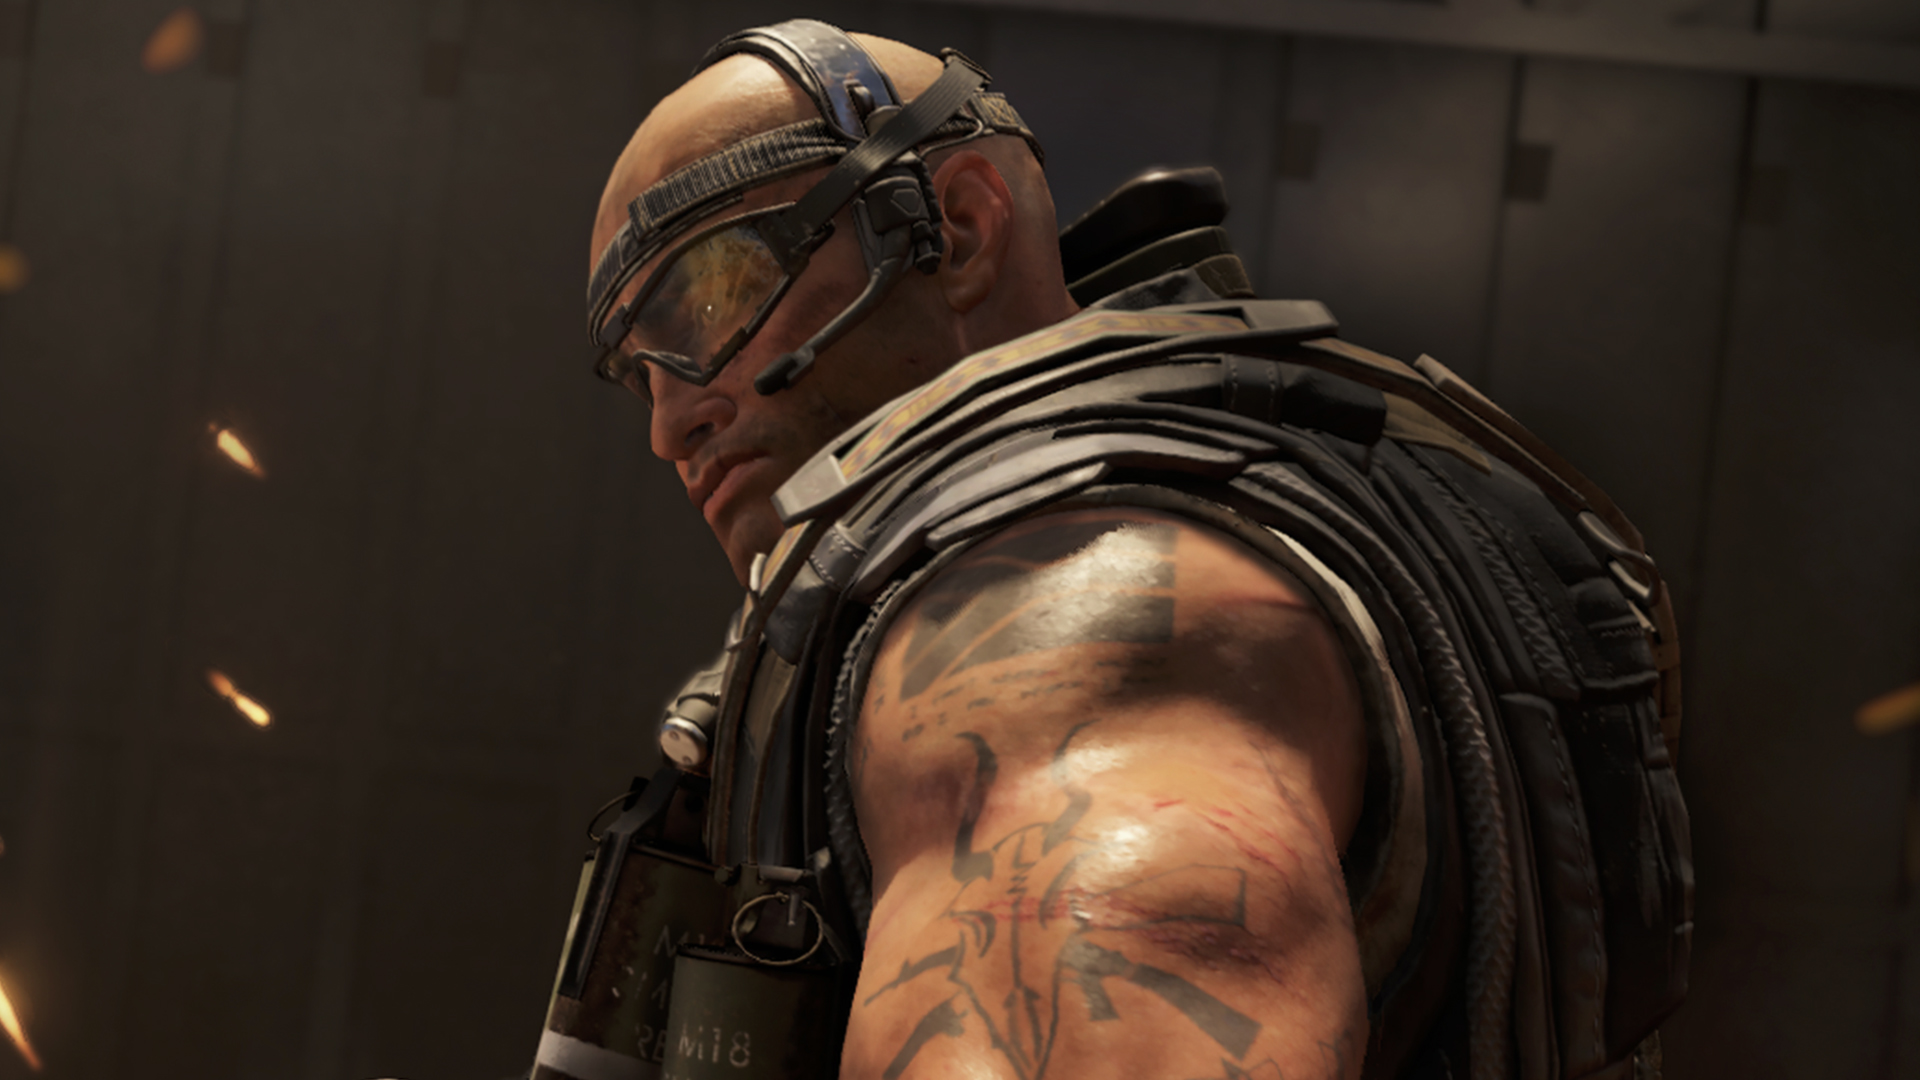 Call of Duty: Black Ops 4 – PC Details